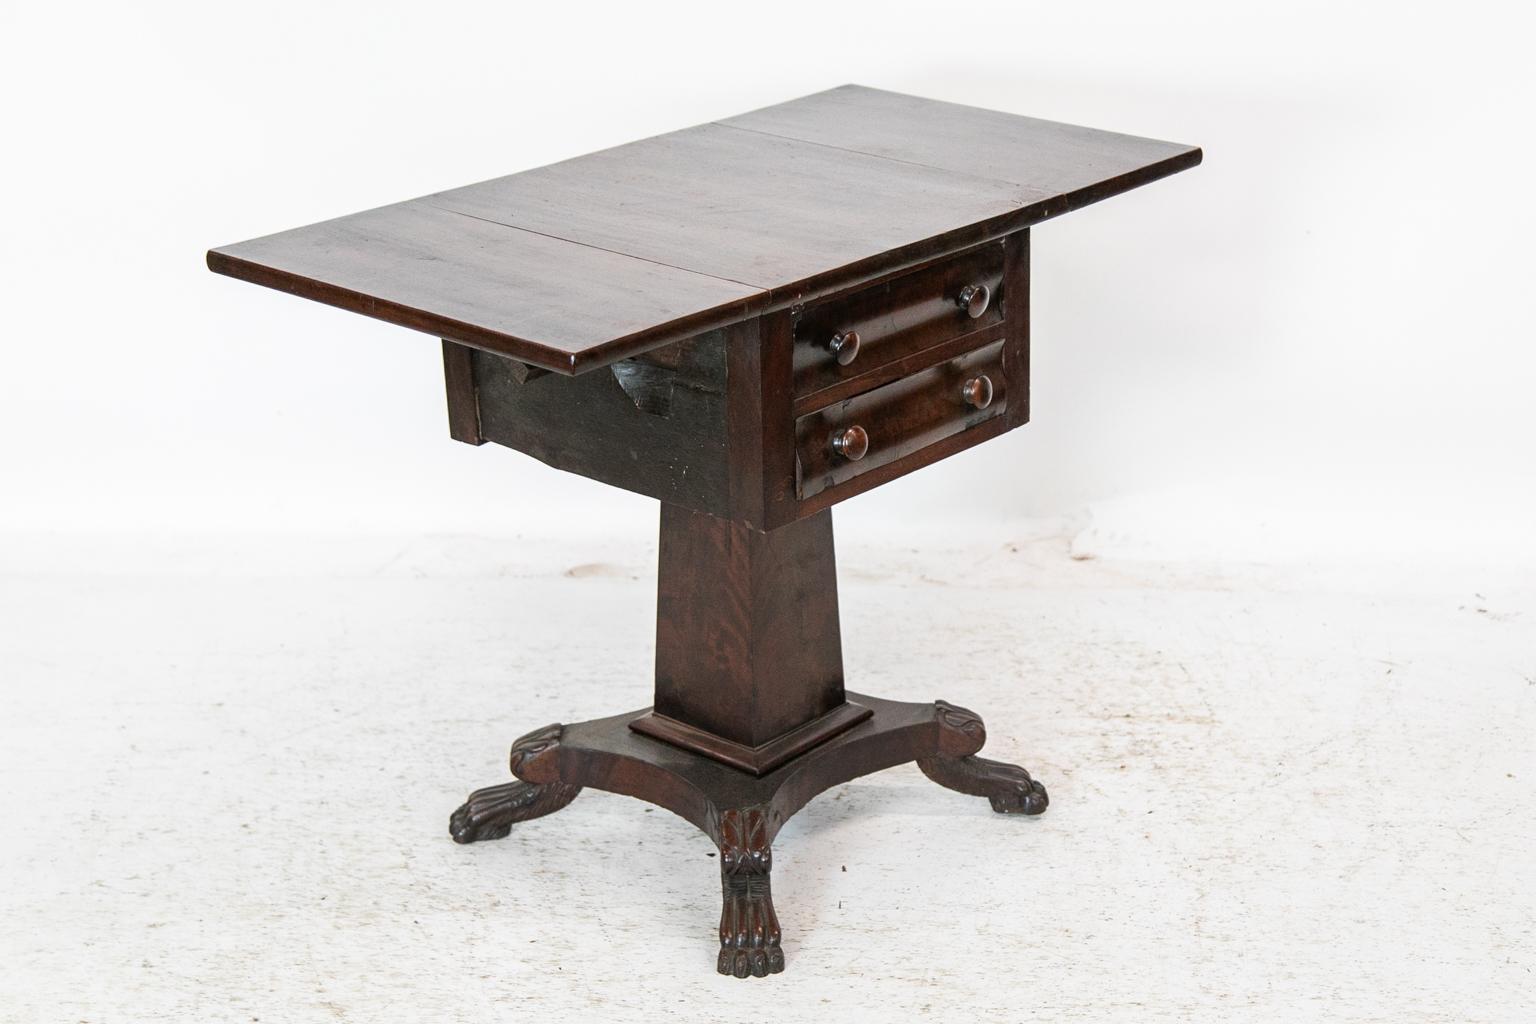 Early 19th Century American Empire Drop-Leaf Table